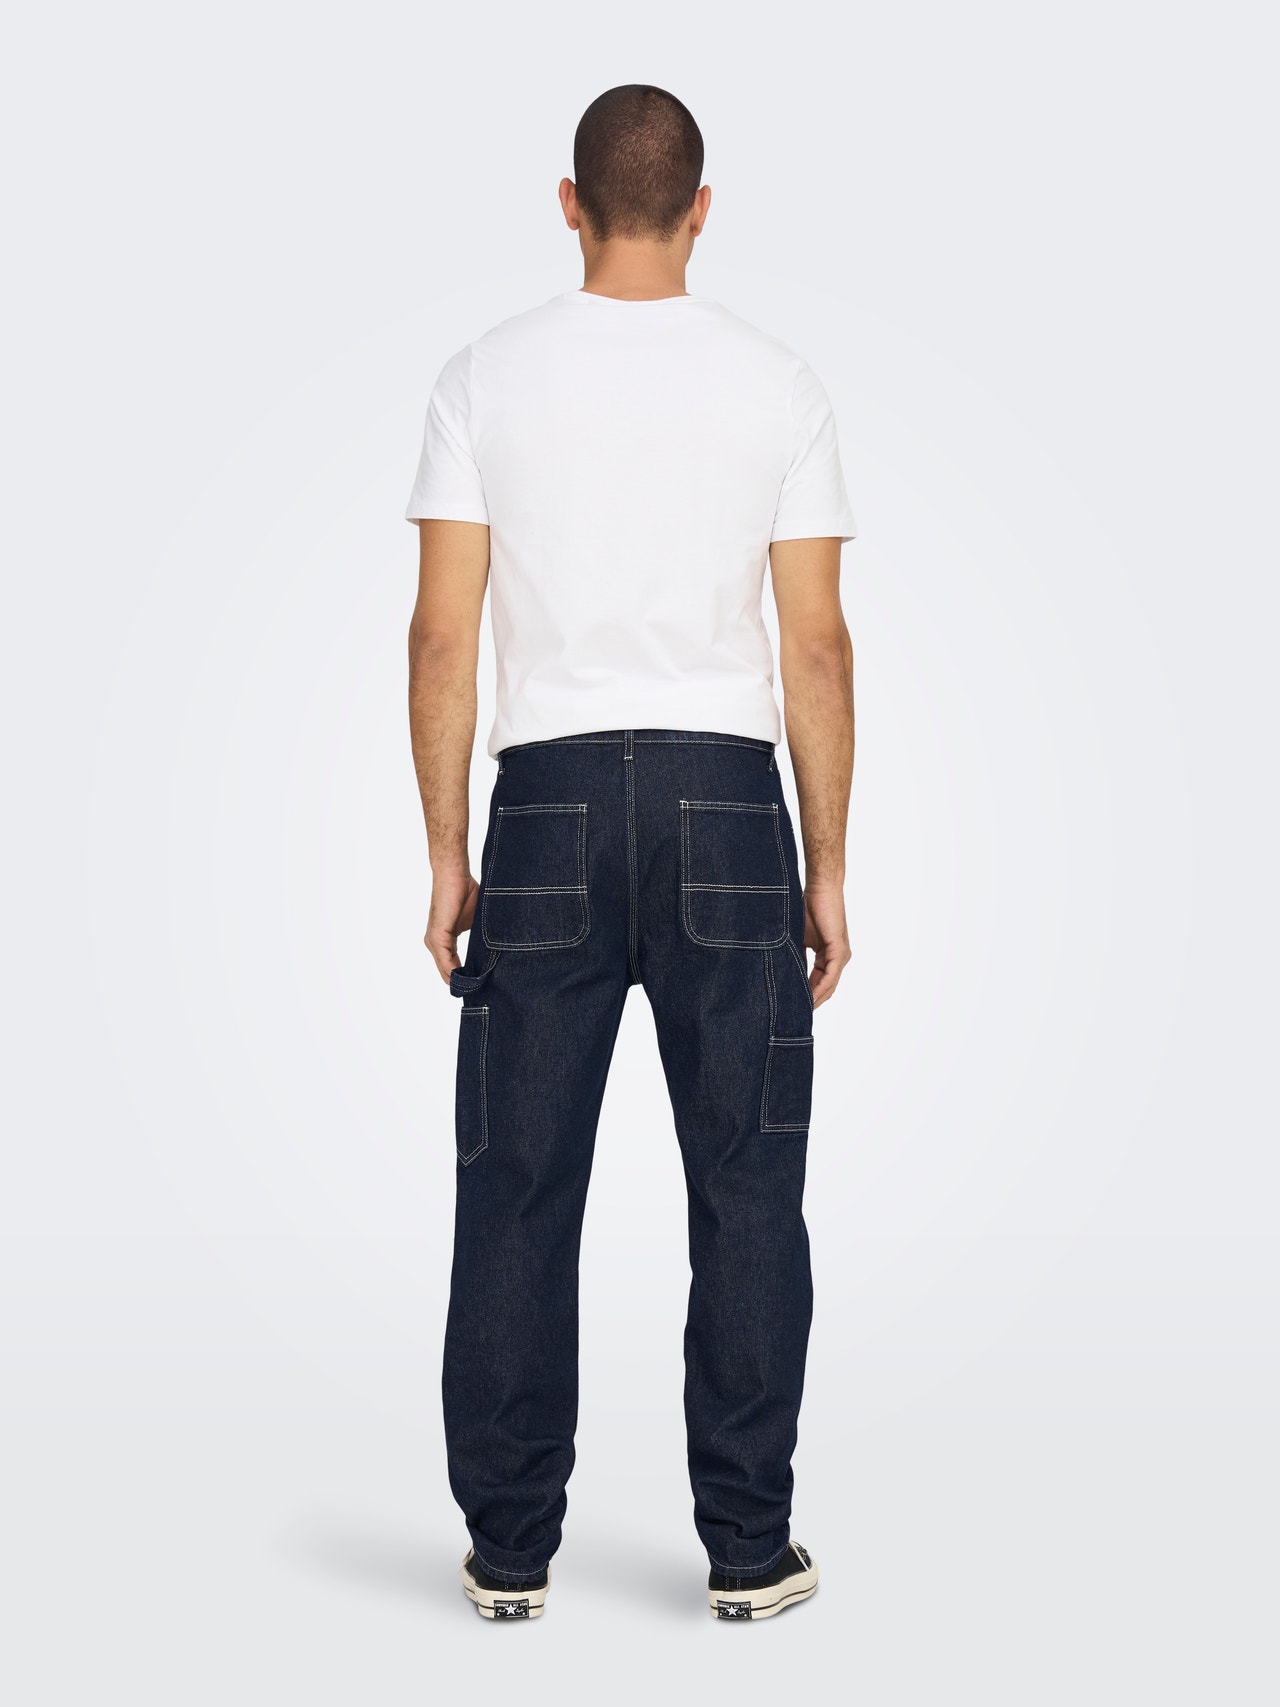 ONLY & SONS Jeans Loose Fit Taille classique -Dark Blue Denim - 22024974